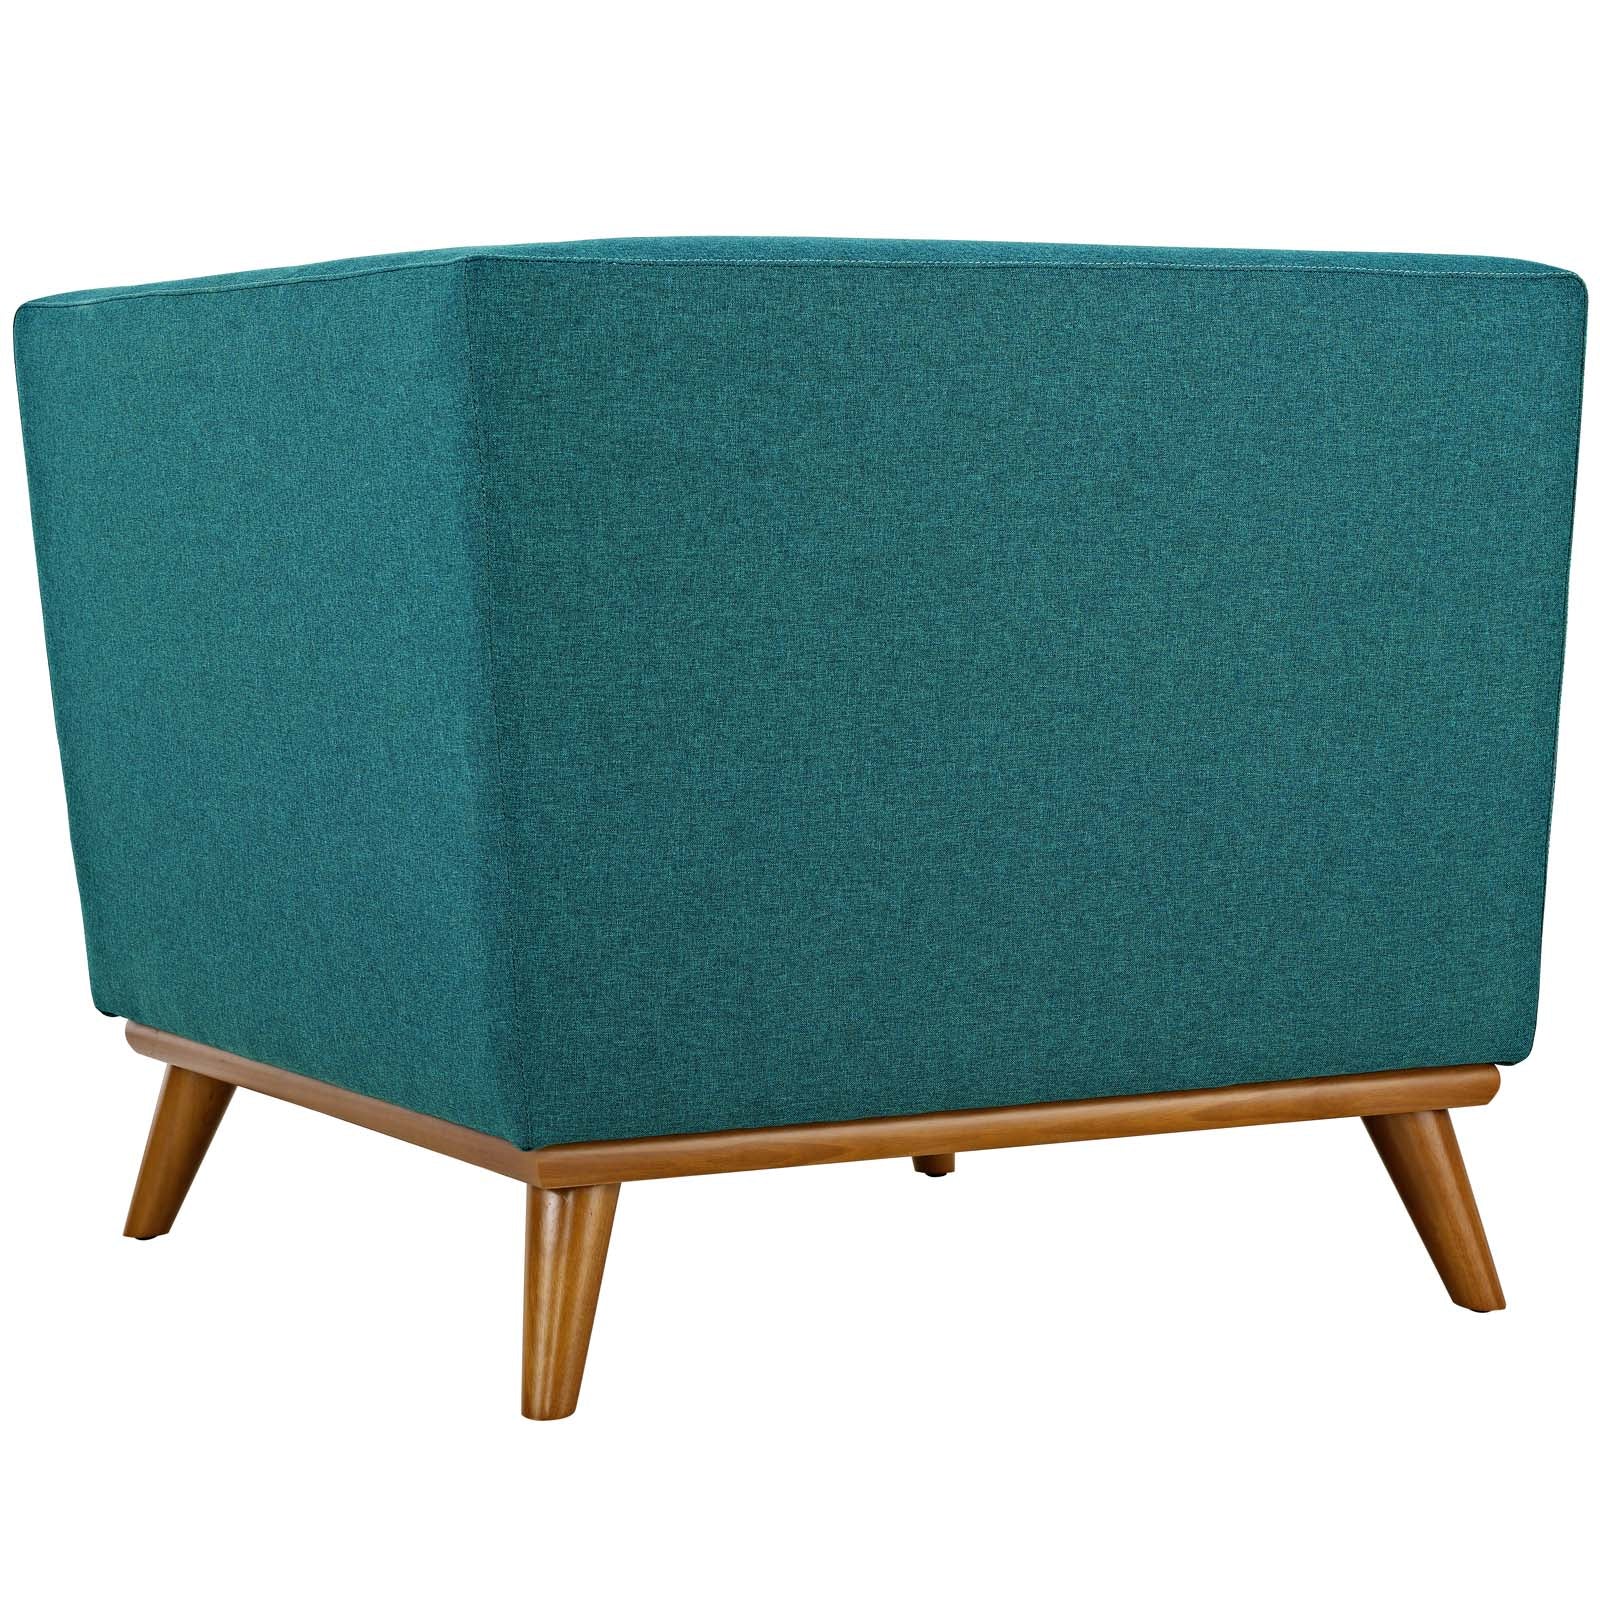 Engage Upholstered Fabric Corner Chair - East Shore Modern Home Furnishings